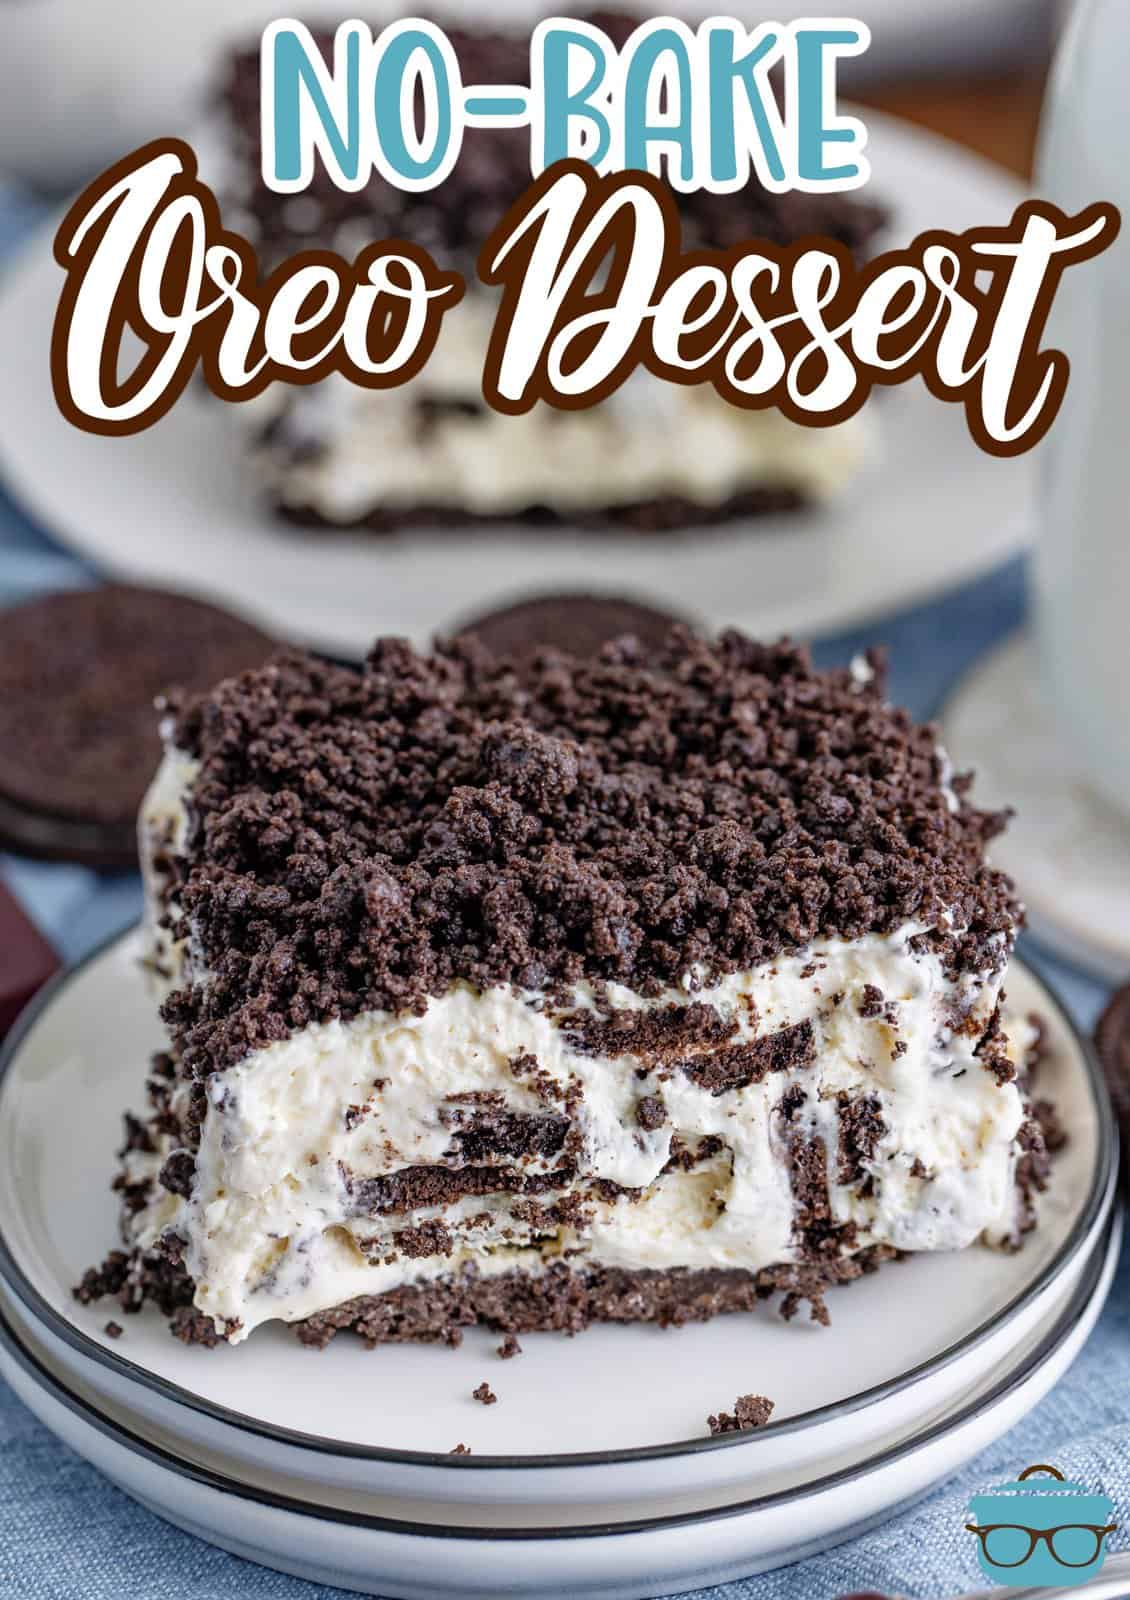 A few plates in a pile with a piece of No Bake Oreo Dessert on the top plate.